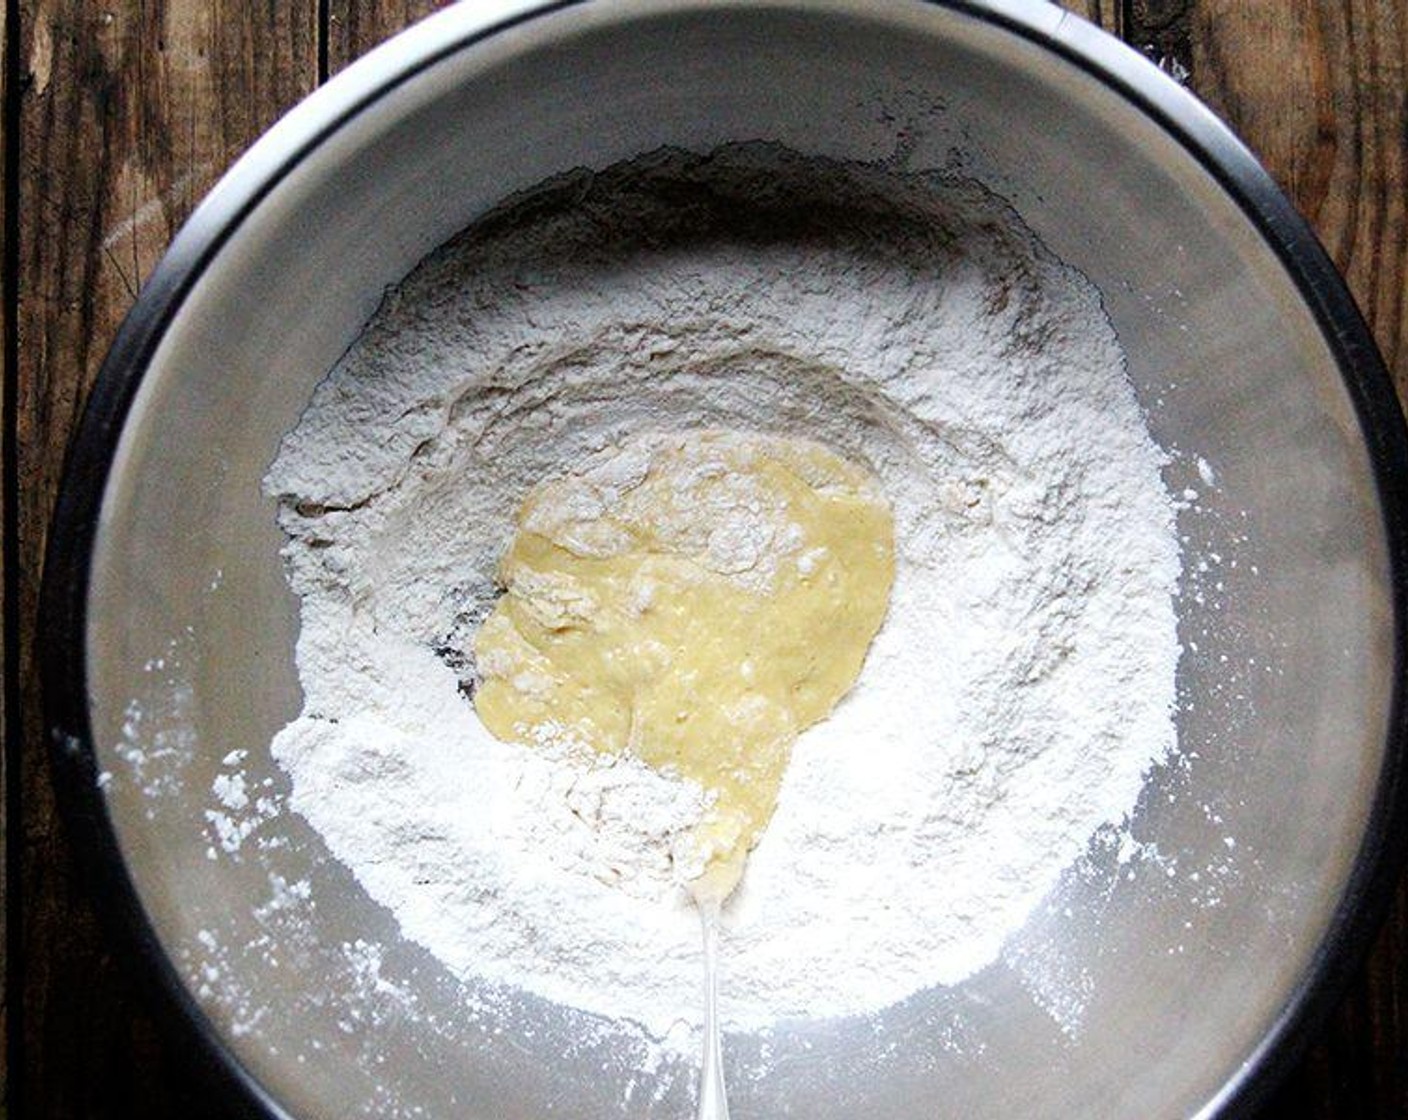 step 1 Whisk the All-Purpose Flour (2 1/2 cups), Granulated Sugar (2 Tbsp), Salt (1/2 Tbsp), Baking Powder (1 tsp), and Baking Soda (1 tsp) together in a large bowl. Add the Farmhouse Eggs® Large Brown Eggs (2) and beat with a fork till the eggs are whisked and incorporated into the surrounding flour, as if you were making pasta.